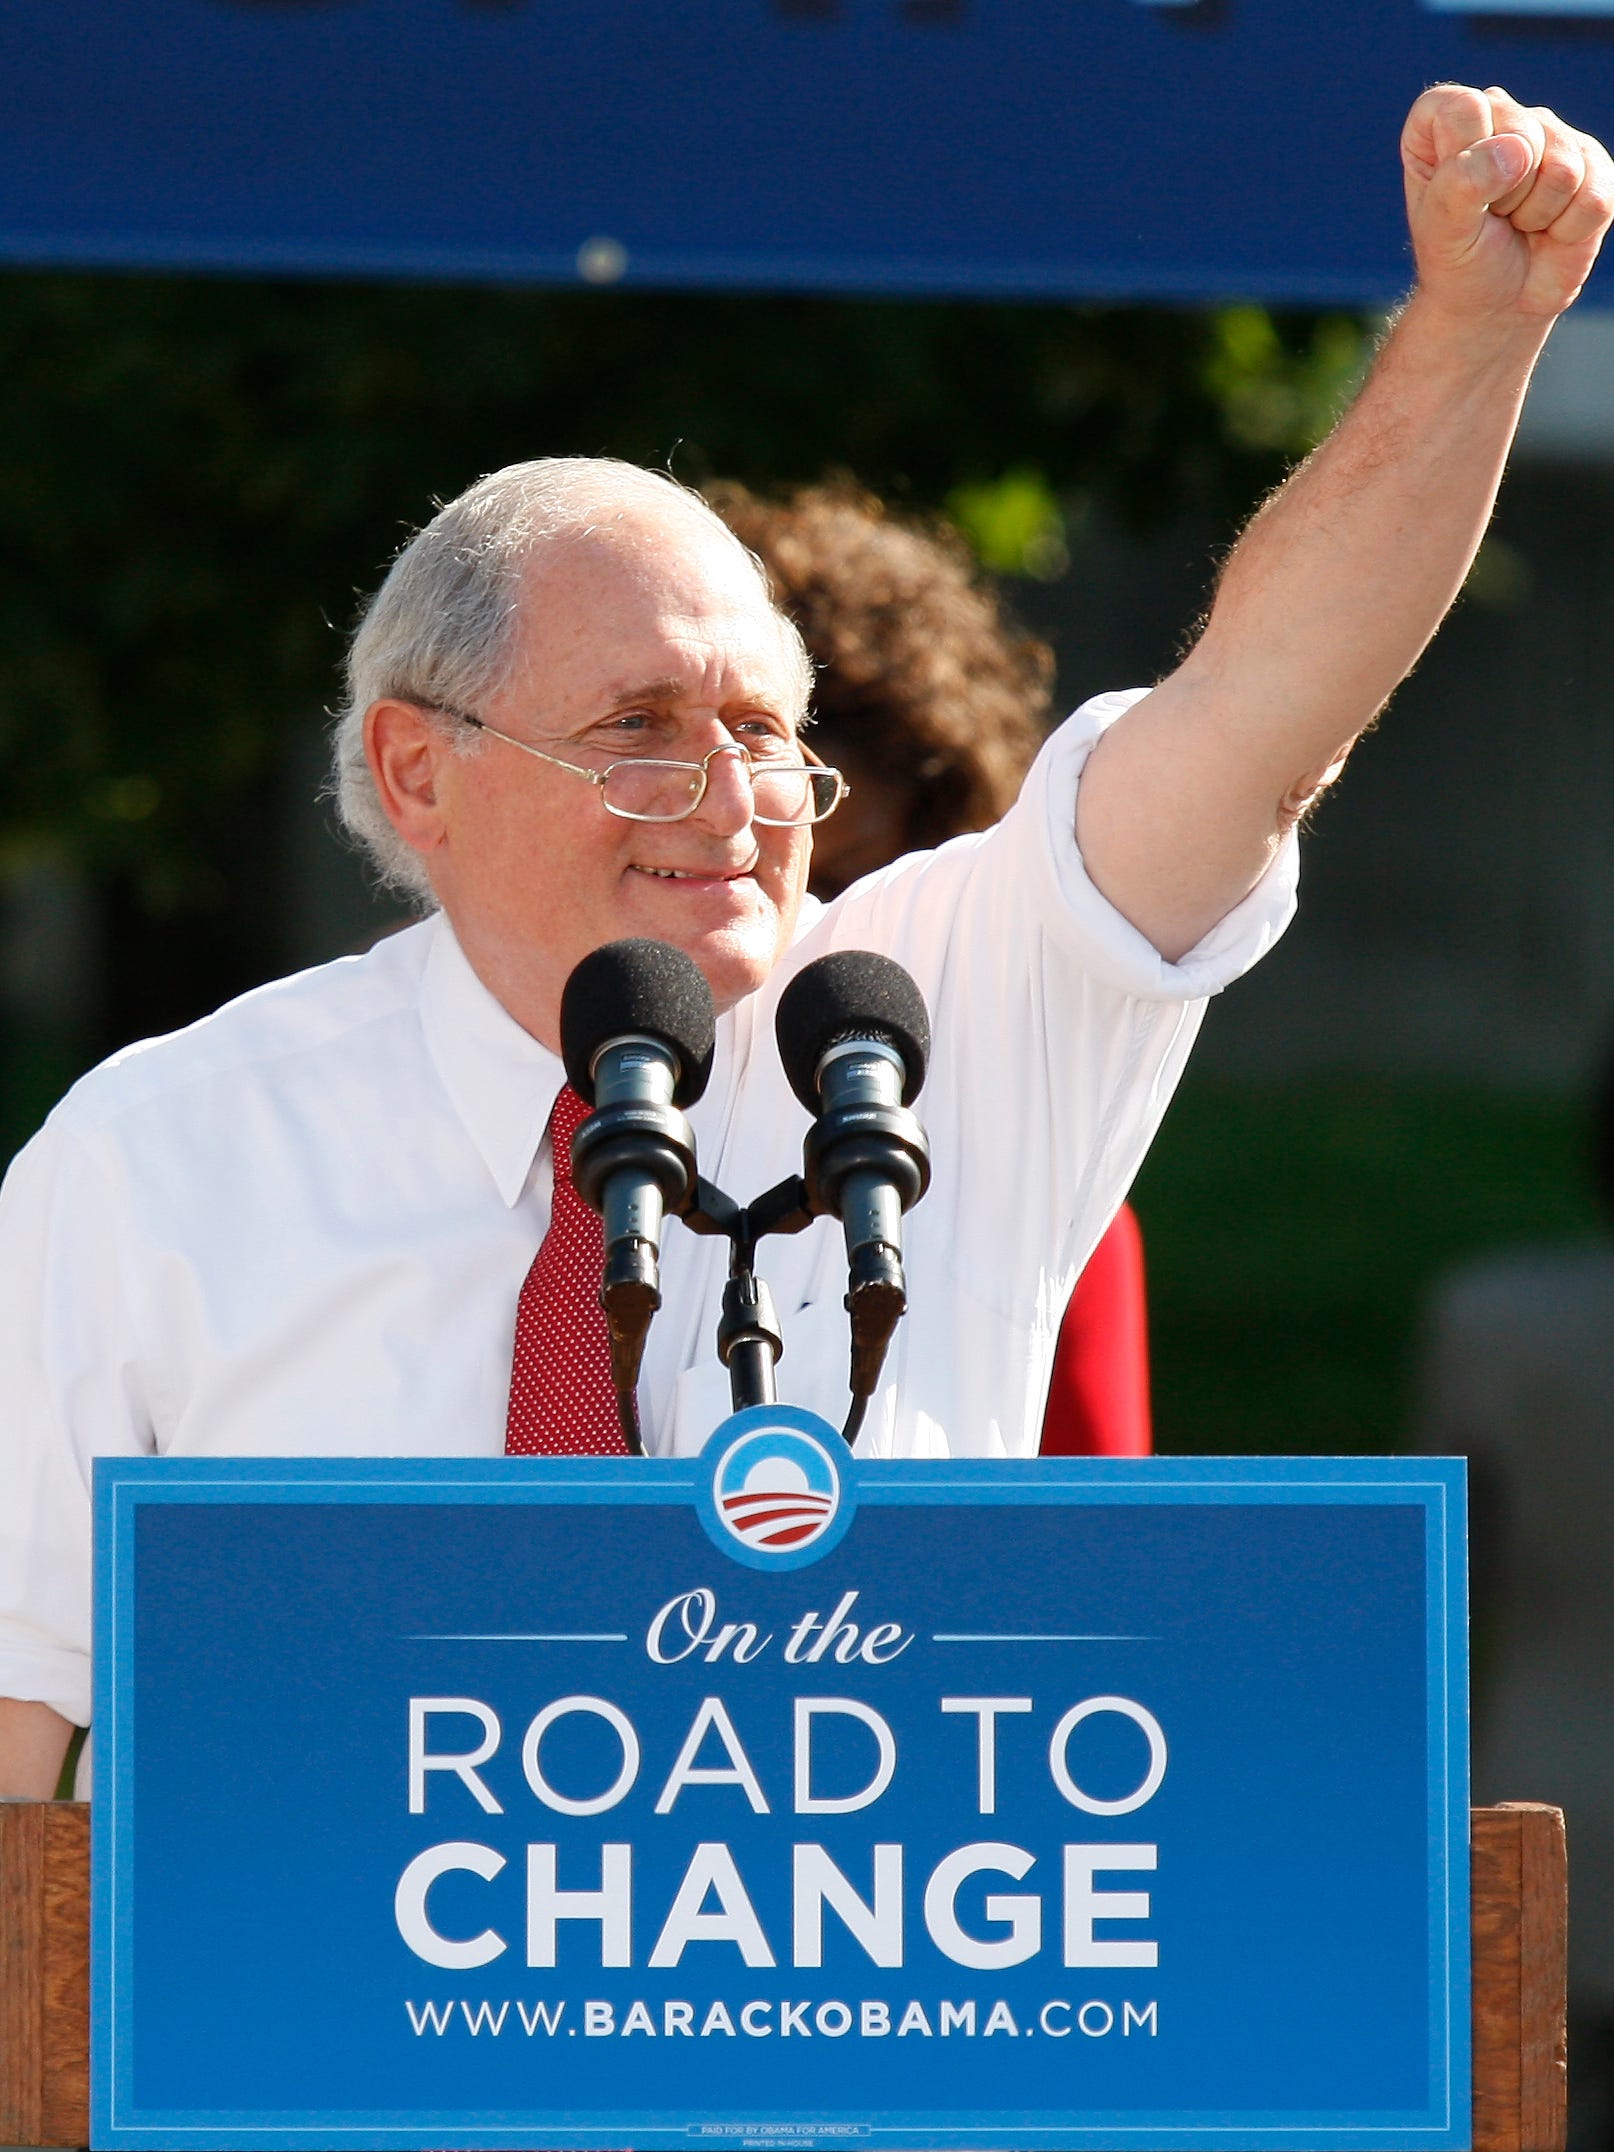 Sen. Carl Levin speaks at a campaign event for  Democratic presidential nominee  Barack Obama at Hart Plaza on Sept. 1, 2008